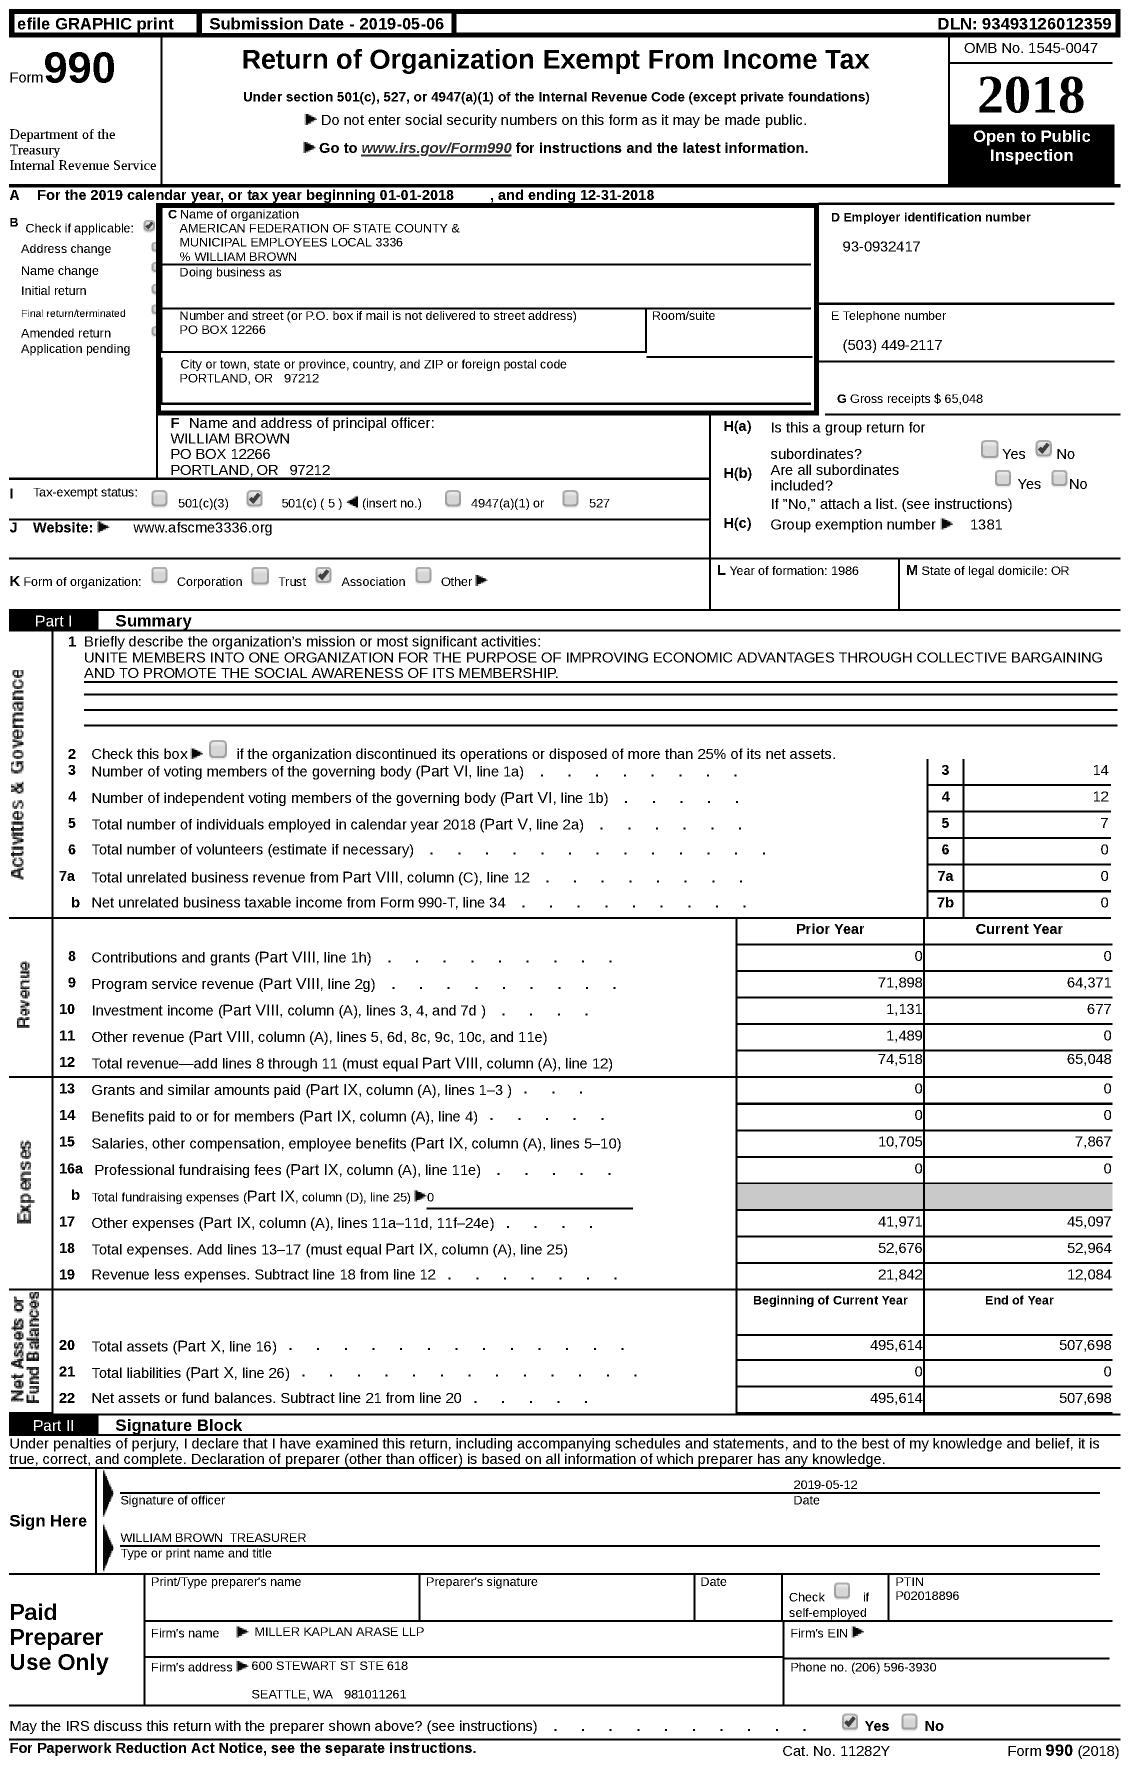 Image of first page of 2018 Form 990 for American Federation of State County & Municipal Employees - L3336or St Environmental Qual Emps